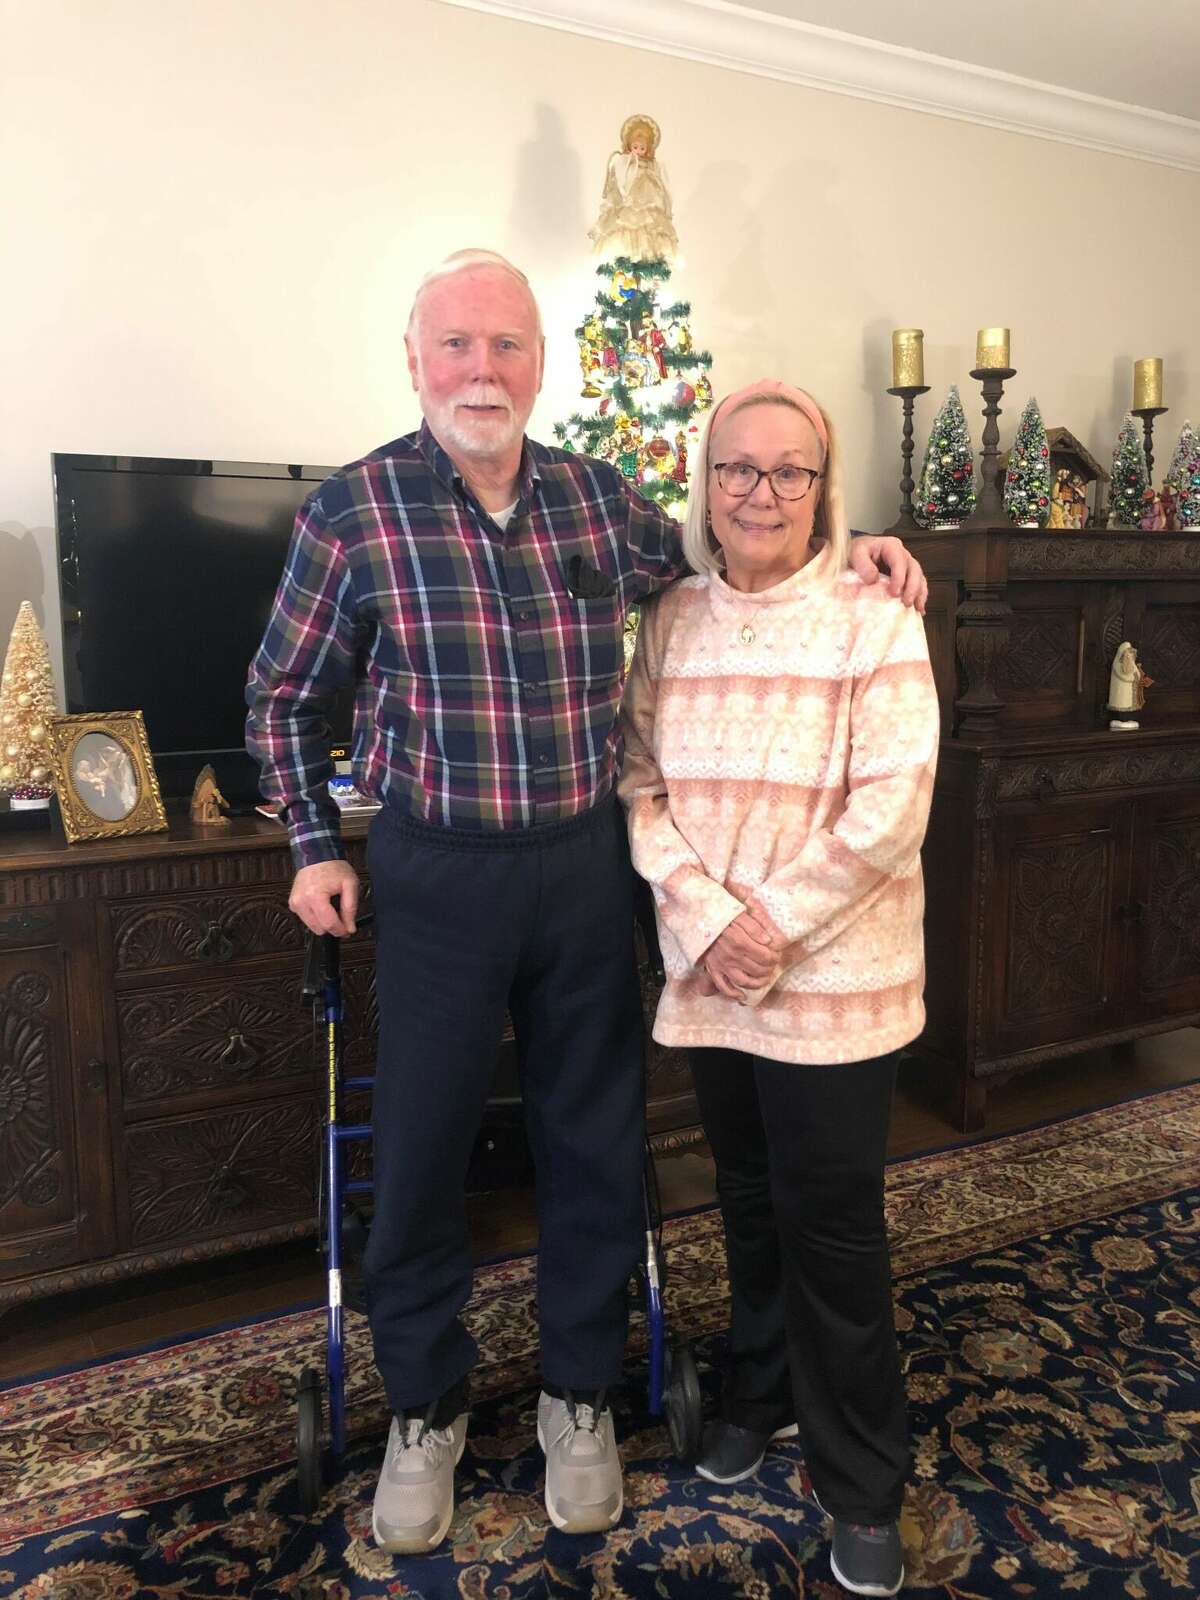 Michael Londrigan of Ridgefield advised his neighbor Kathy Backus to seek a neuromuscular specialist when she began experiencing ALS symptoms in 2021. Londrigan was diagnosed with ALS in October of 2018 while Backus was diagnosed with ALS in November of 2021.